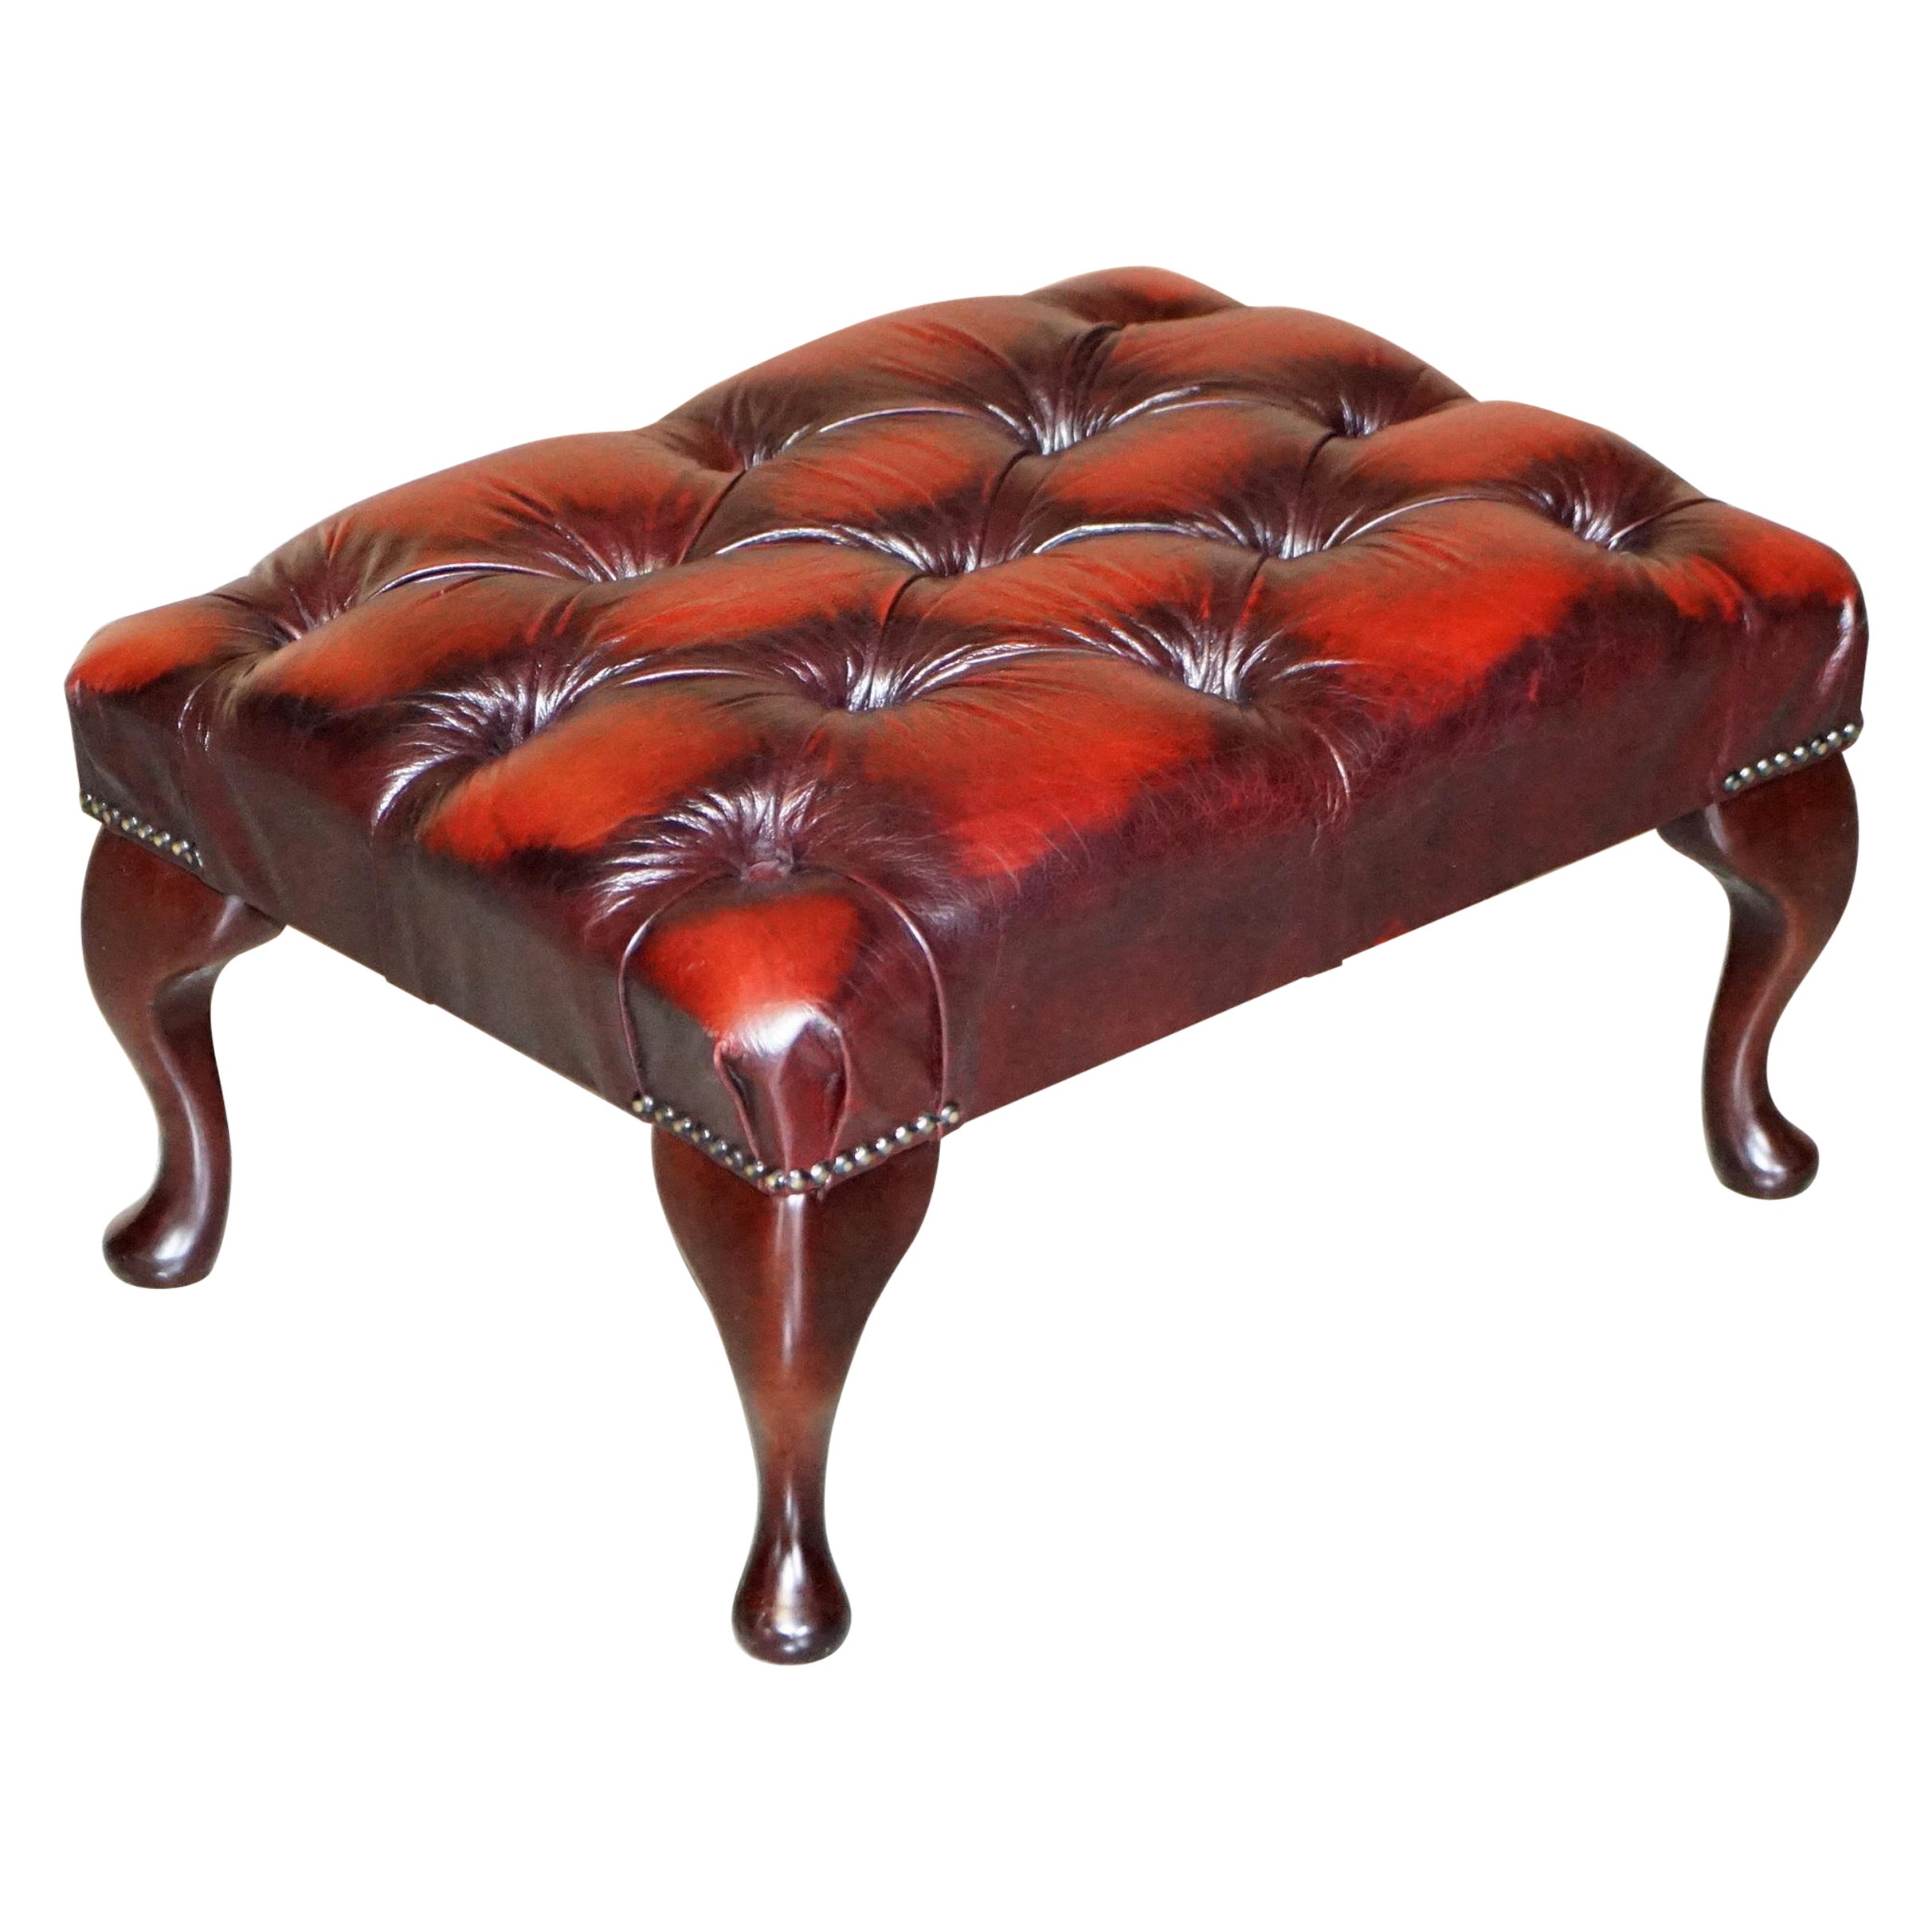 Lovely Oxblood Leather Chesterfield Footstool Ottoman Beech Wood Cabriolet Legs